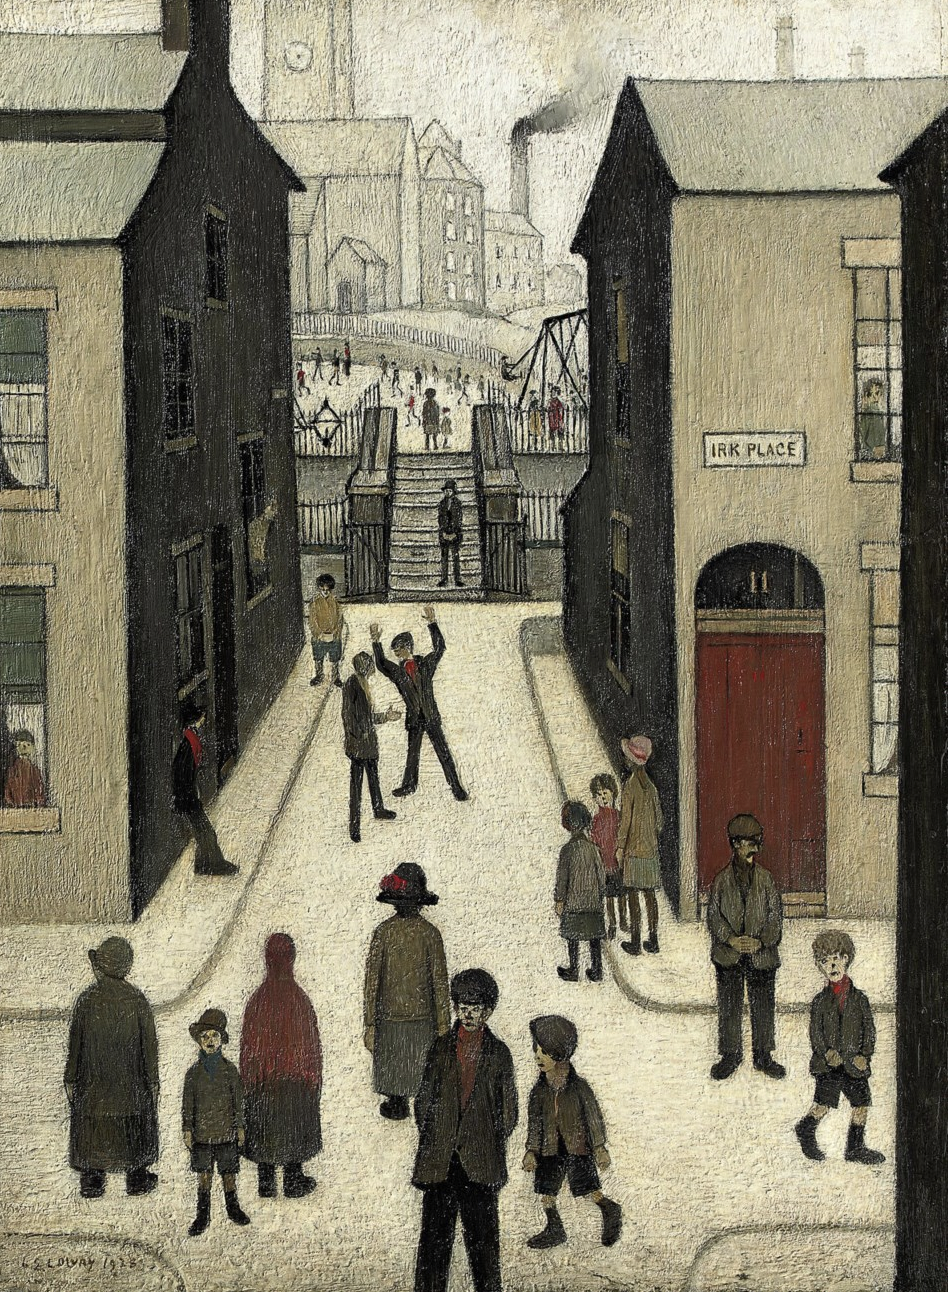 The Steps, Irk Place (1928) by Laurence Stephen Lowry (1887 - 1976), English artist.